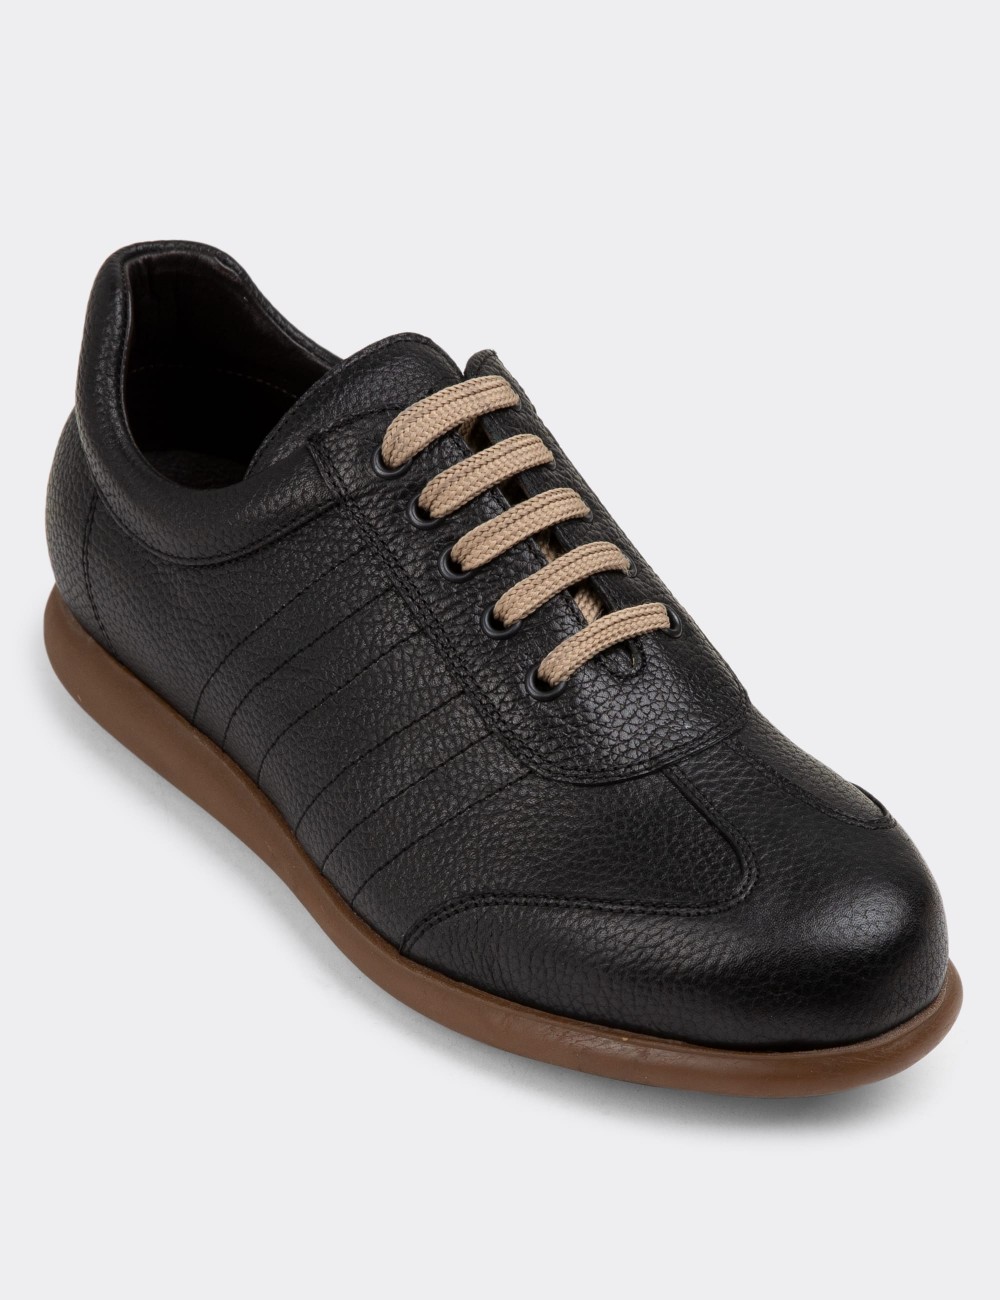 Black Leather Lace-up Shoes - 01826MSYHC07